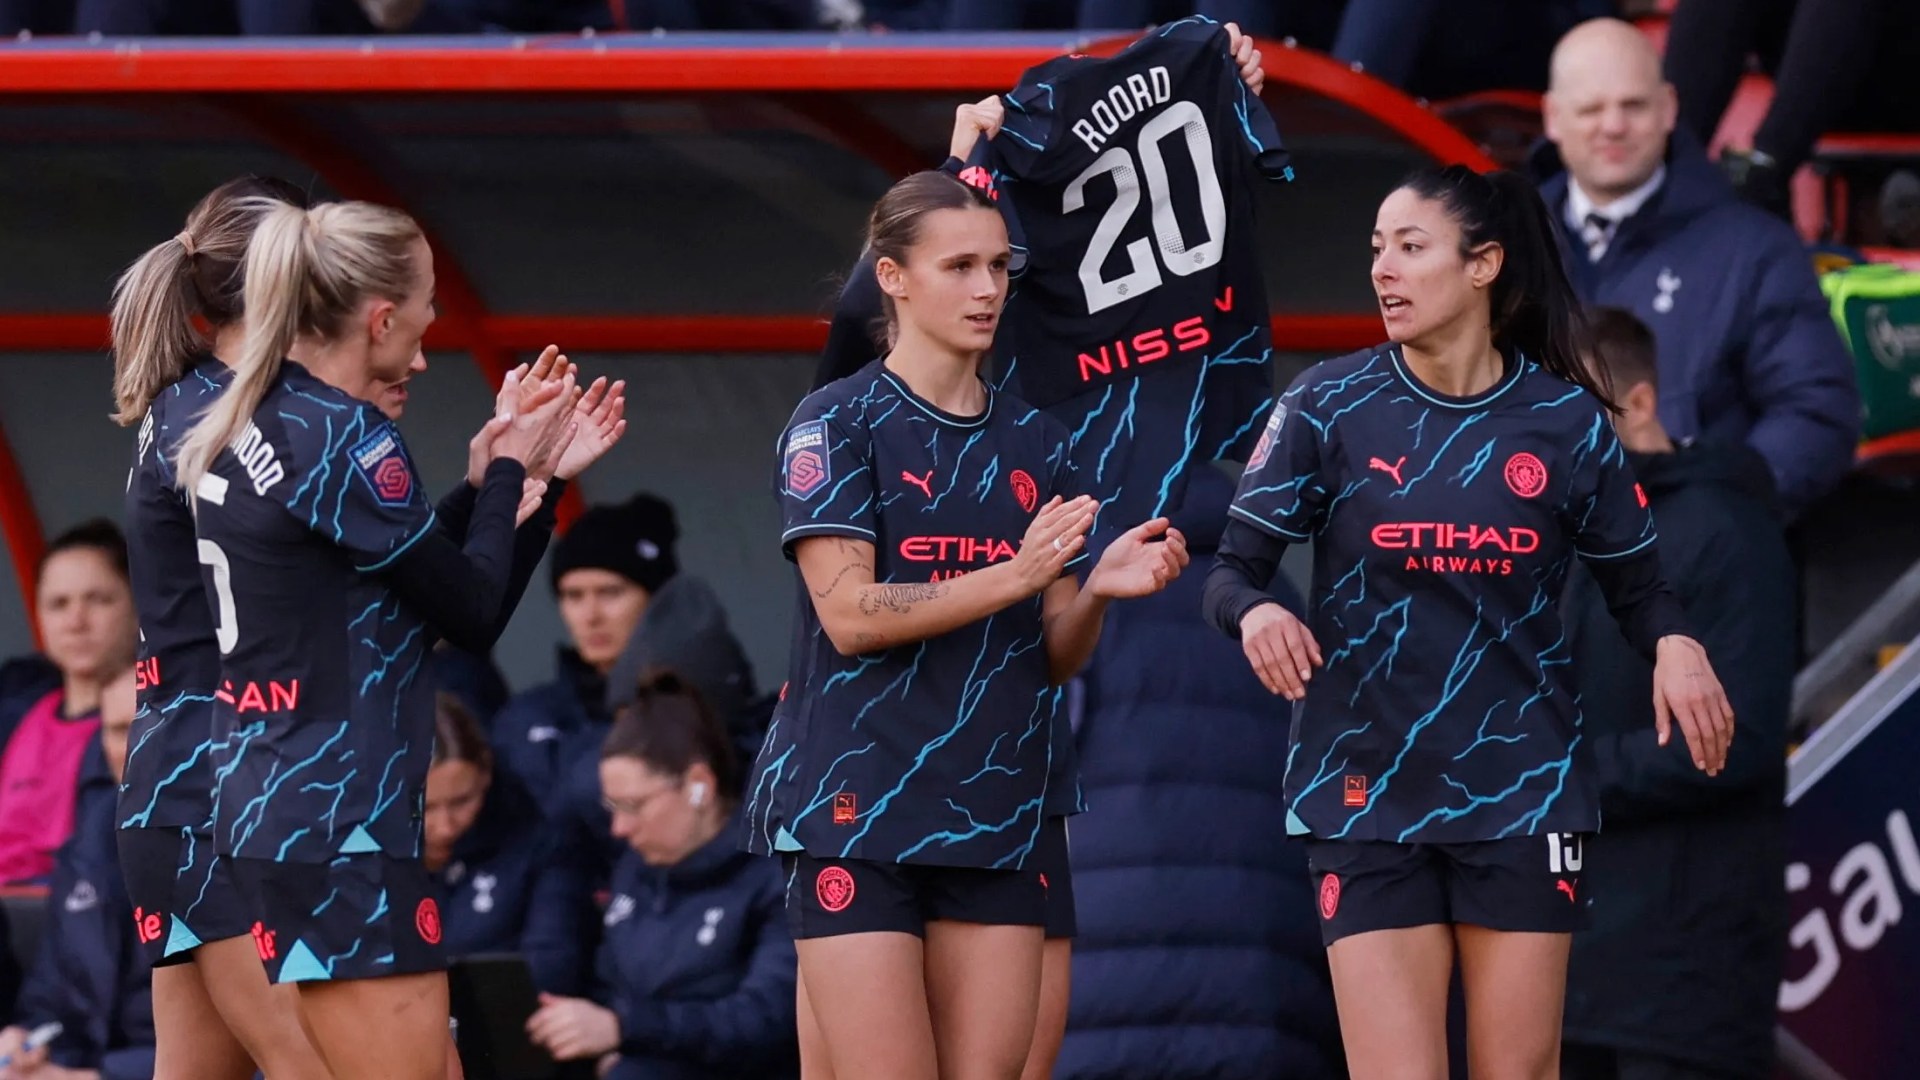 Taylor hails Manchester City aces’ shirt celebration for injured team-mate Jill Roord during win at Tottenham